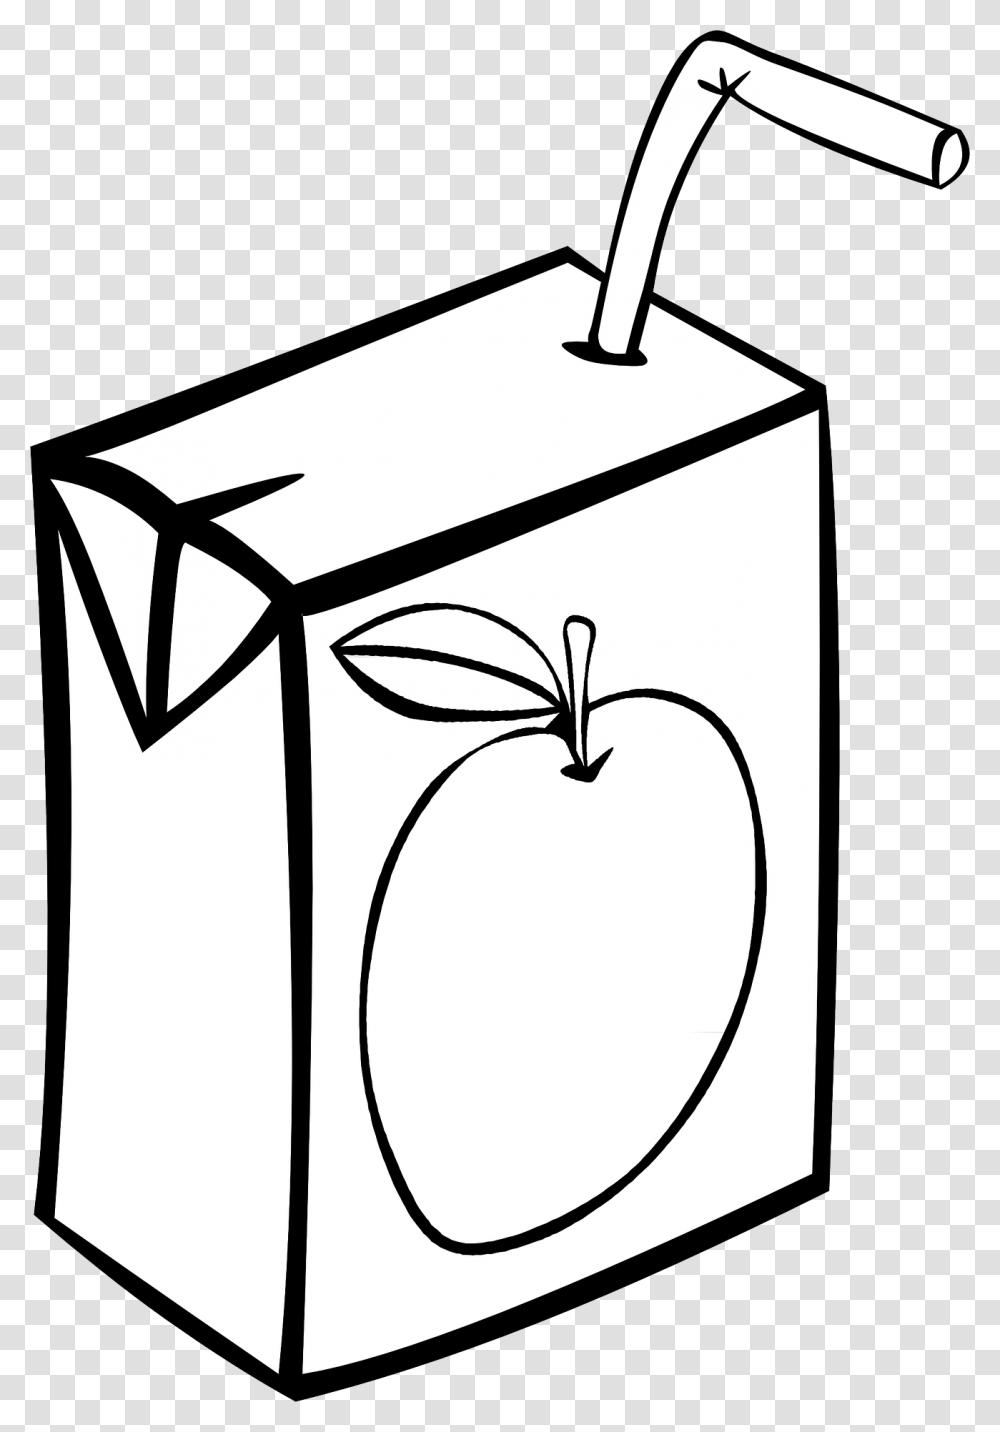 Apple Juice Bw Svg Freeuse Files Juice Black And White, Paper, Box, Lawn Mower, Tool Transparent Png